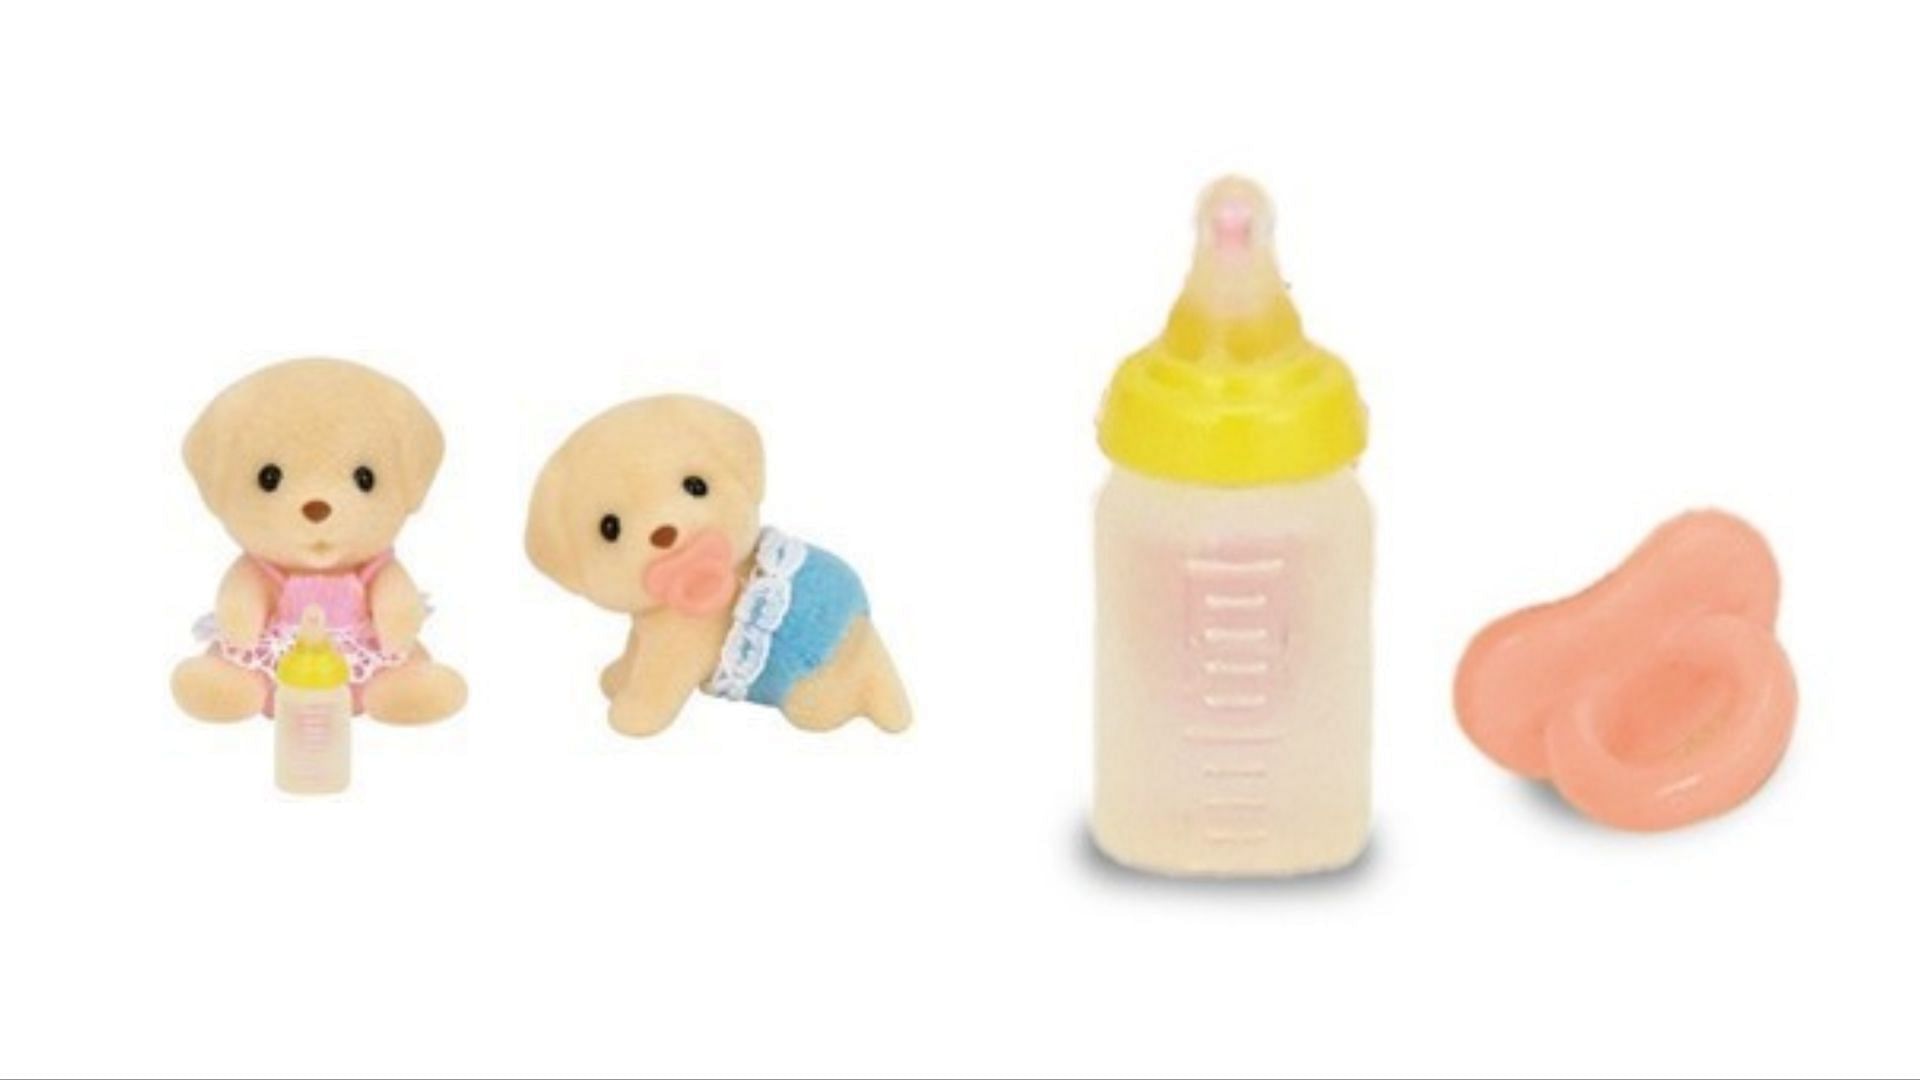 the recalled Calico Critter sets sold with bottle and pacifier accessories can pose life-threatening risks when swallowed by small children (Image via Consumer Product Safety Commission/Epoch Everlasting Play LLC)